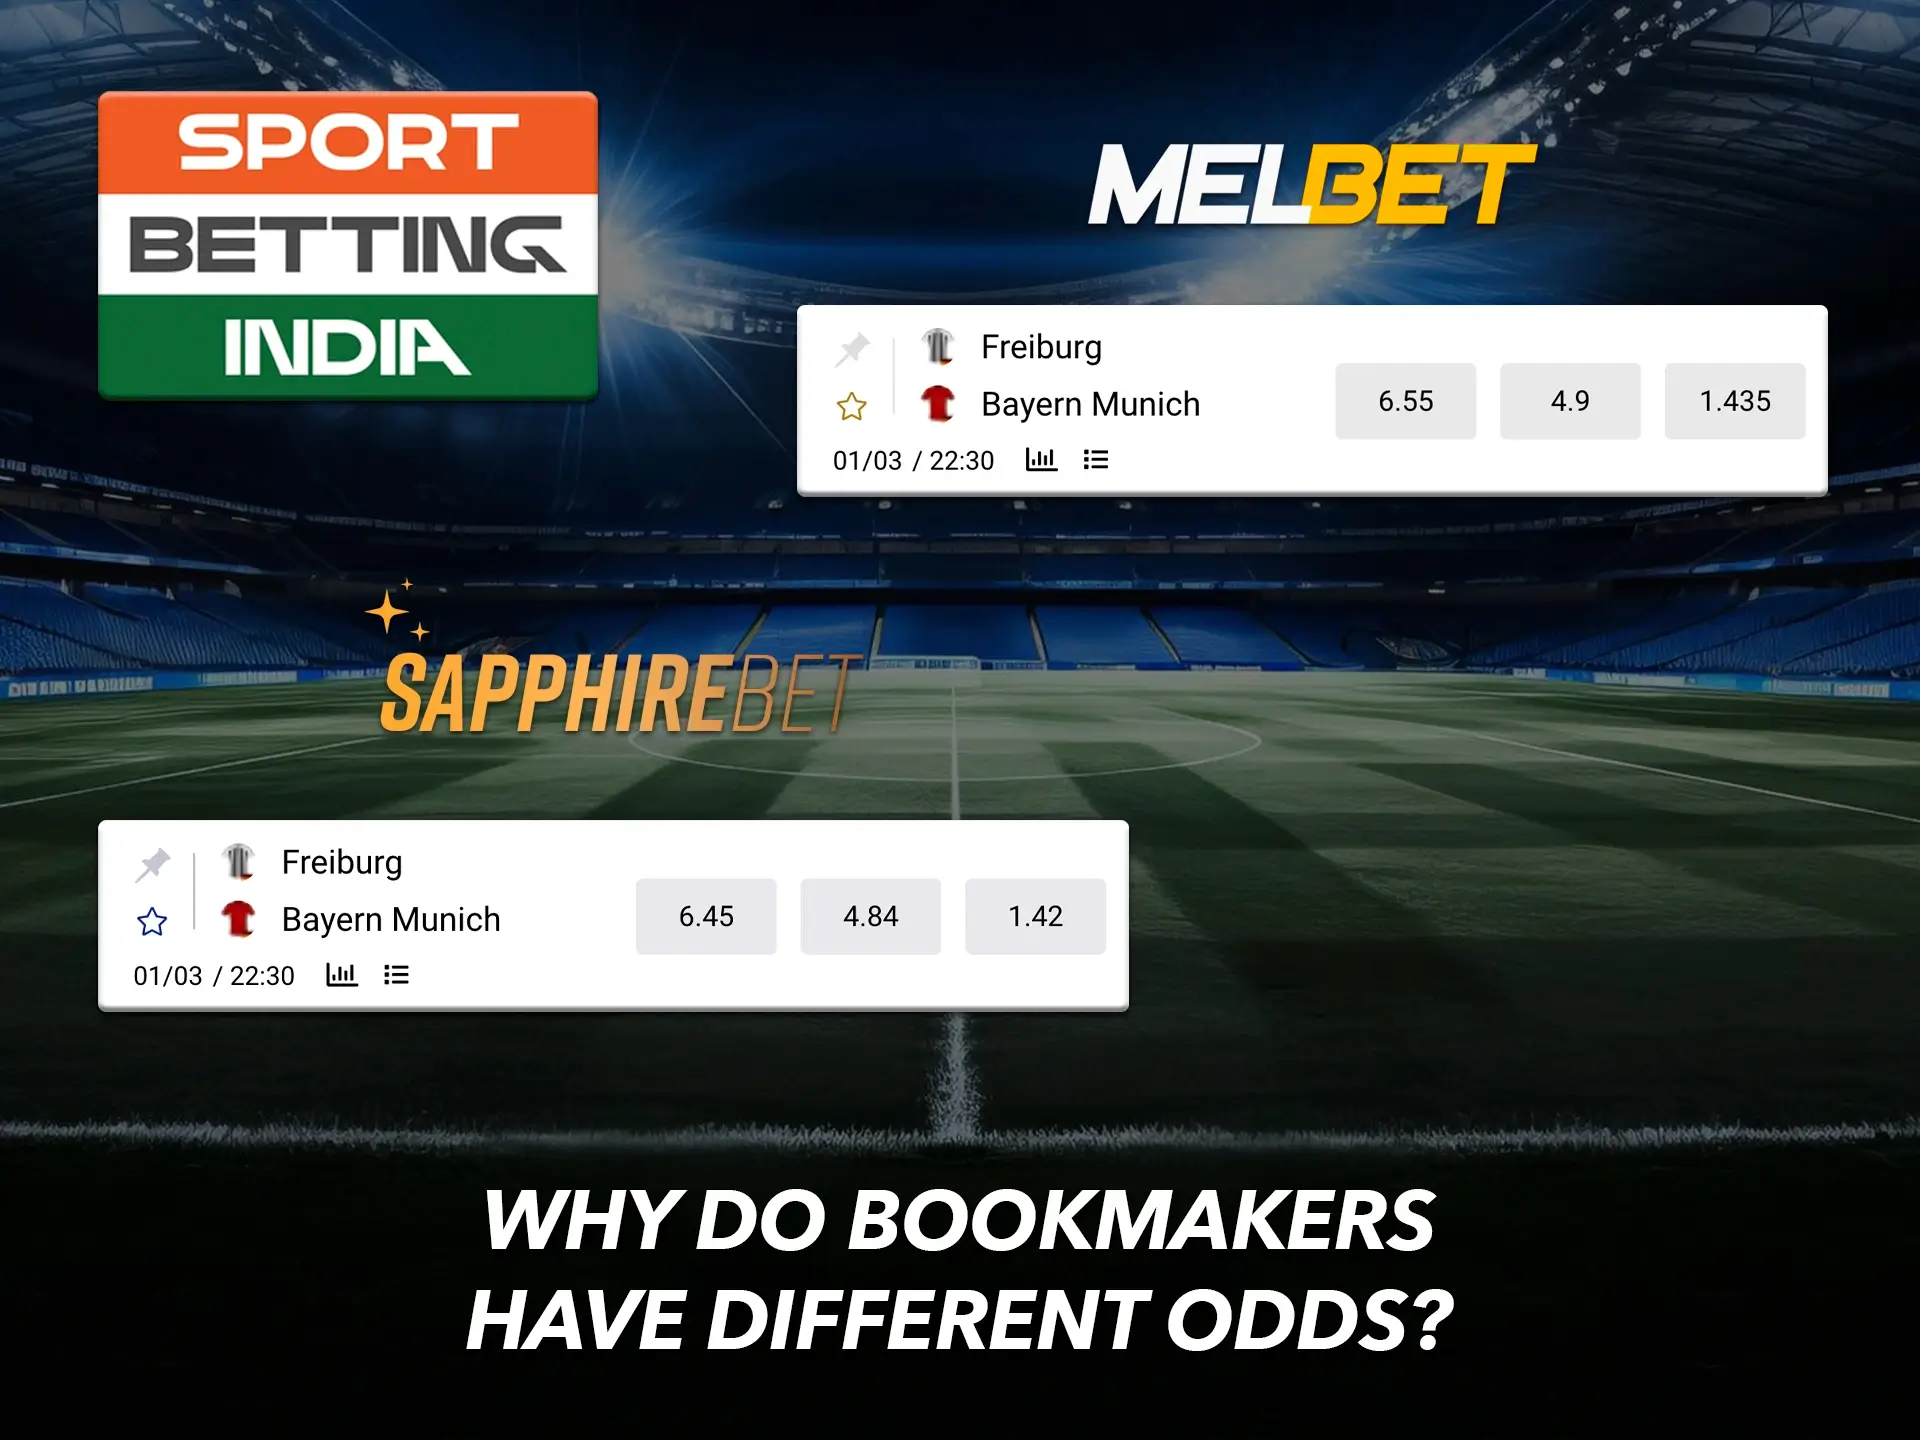 Look for high odds and earn big winnings from reputed bookmakers in India.